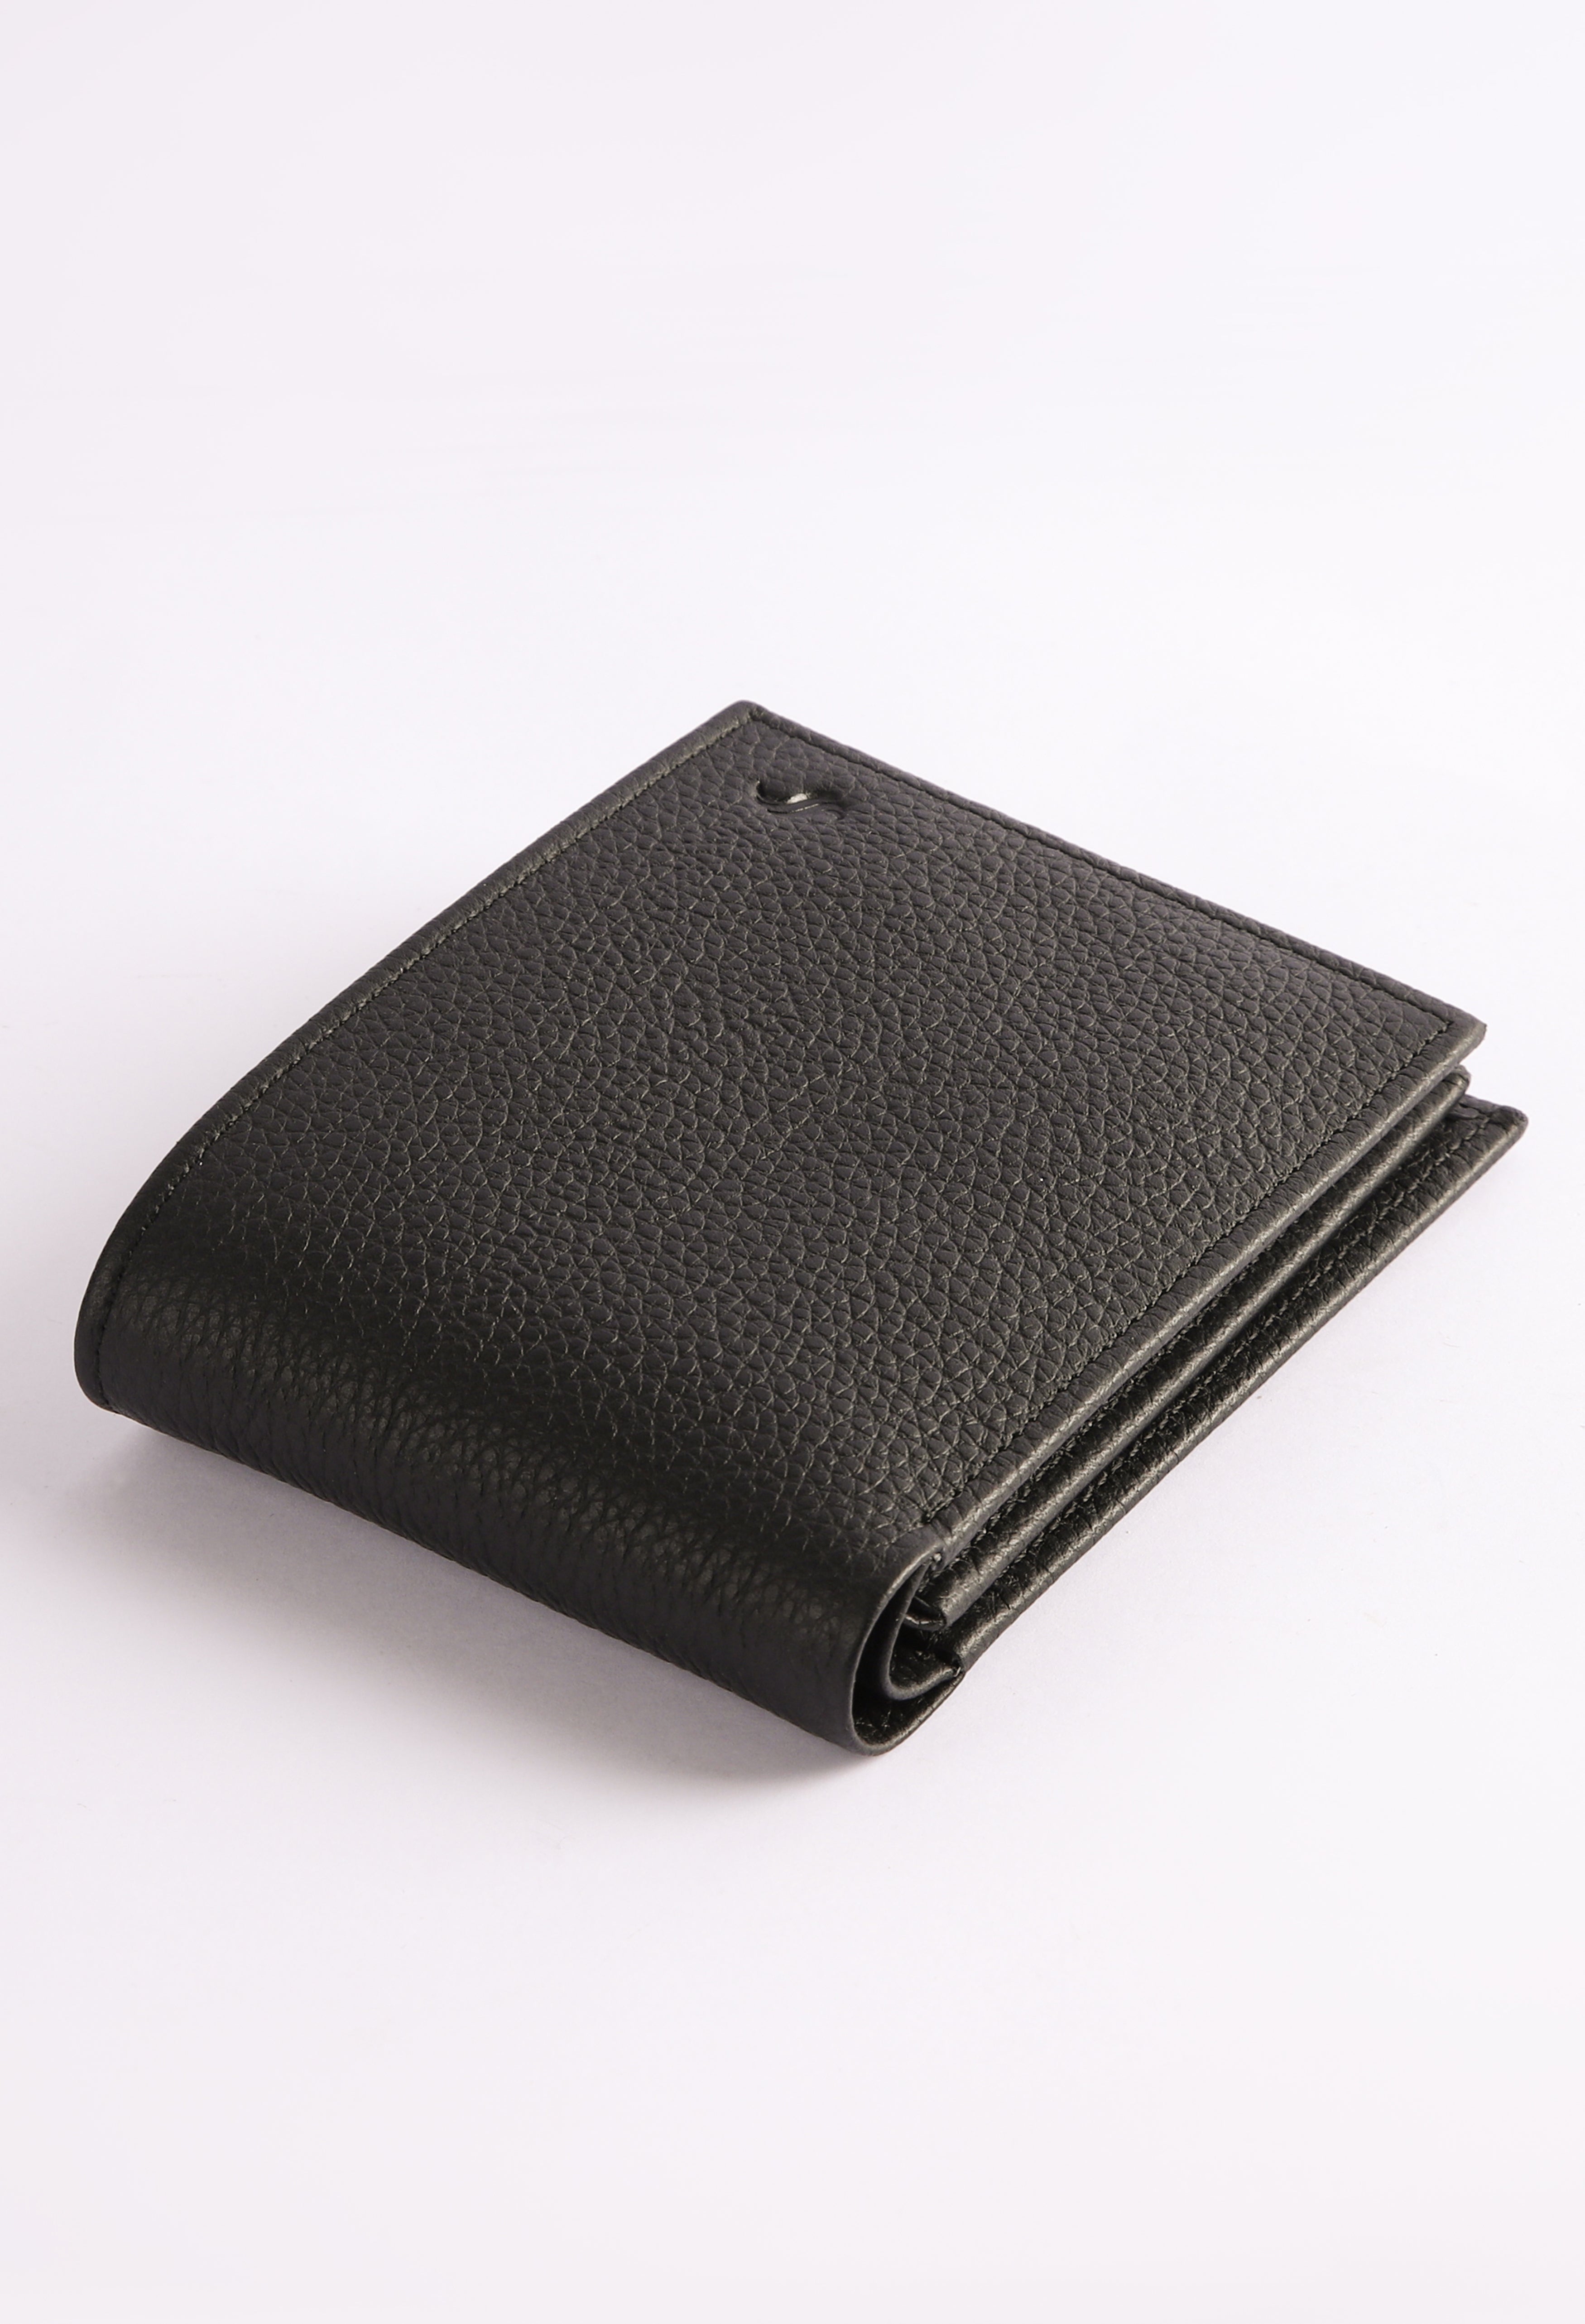 Expresso black Pure Leather Wallet (WL-000018)